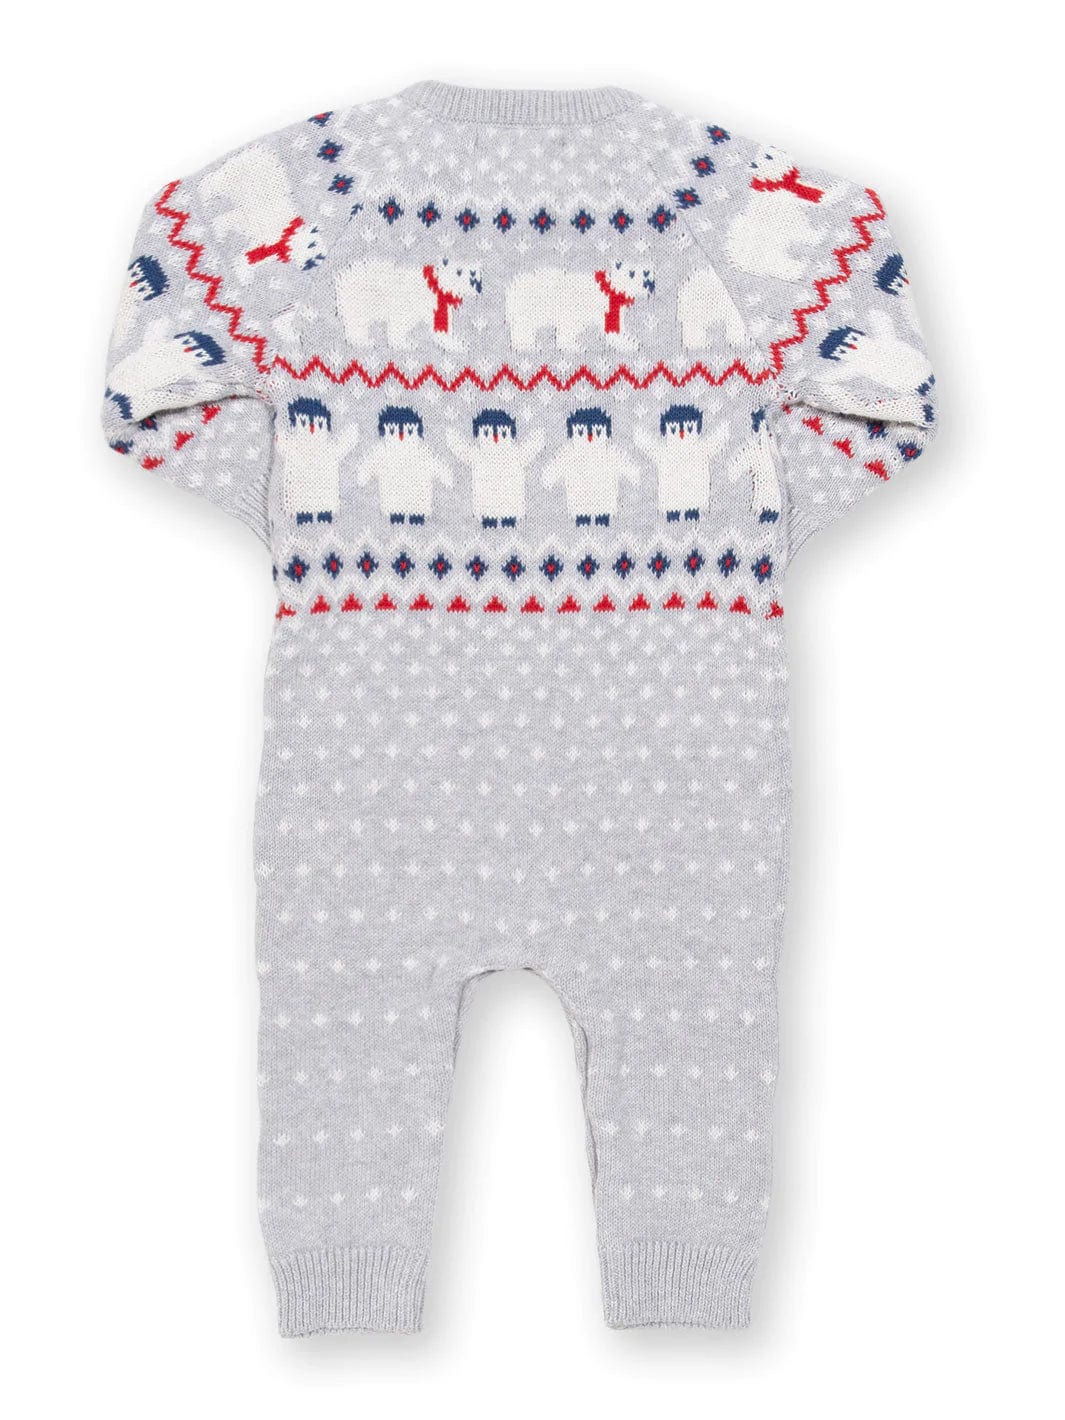 Polar Pals Knit Romper [only 18 to 24 Months left]